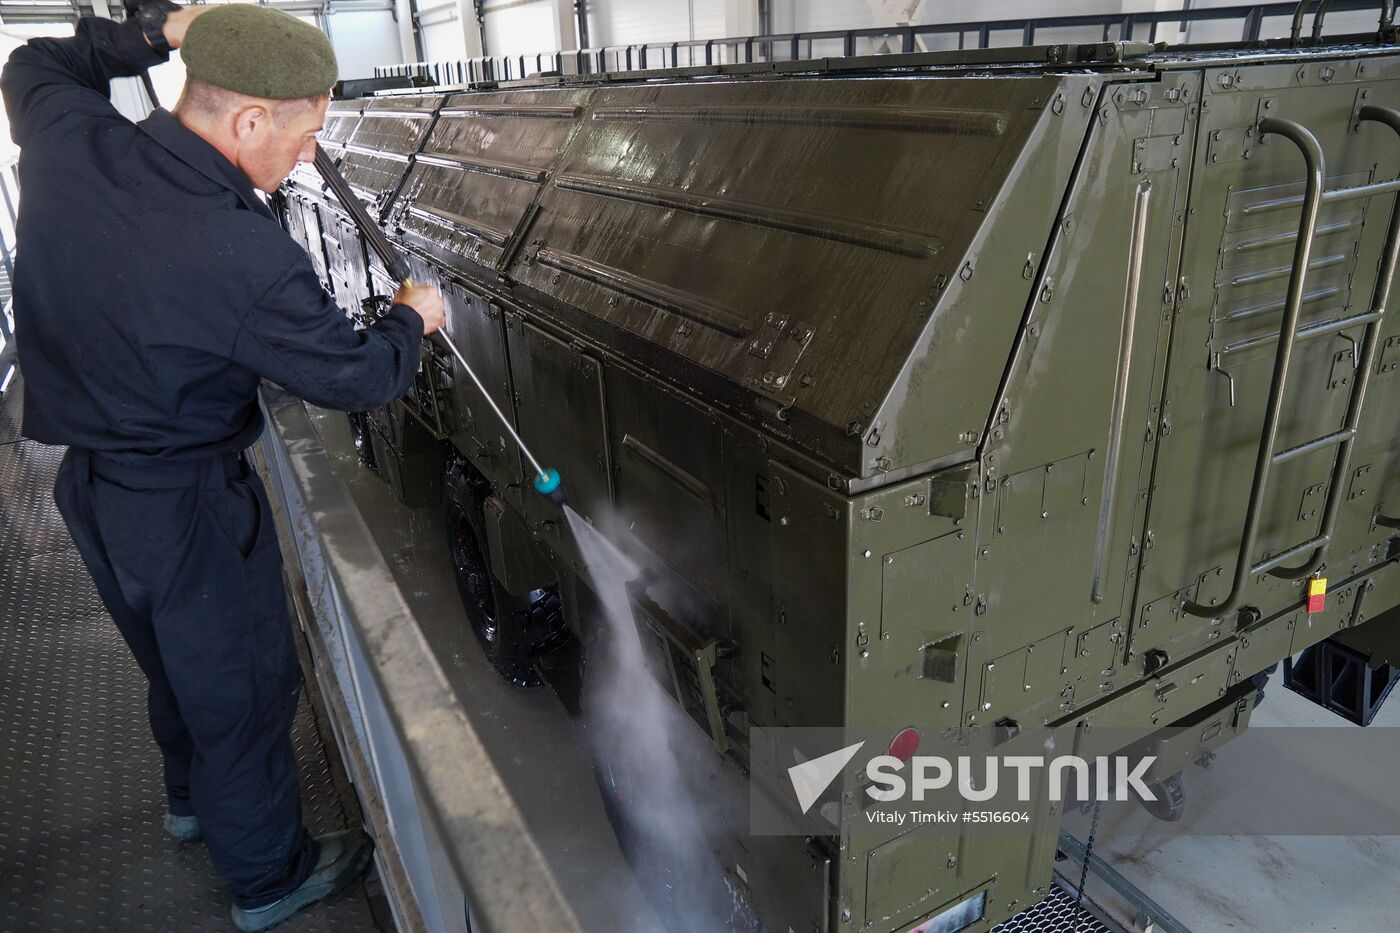 Servicing yard for Iskander-M missile systems opened